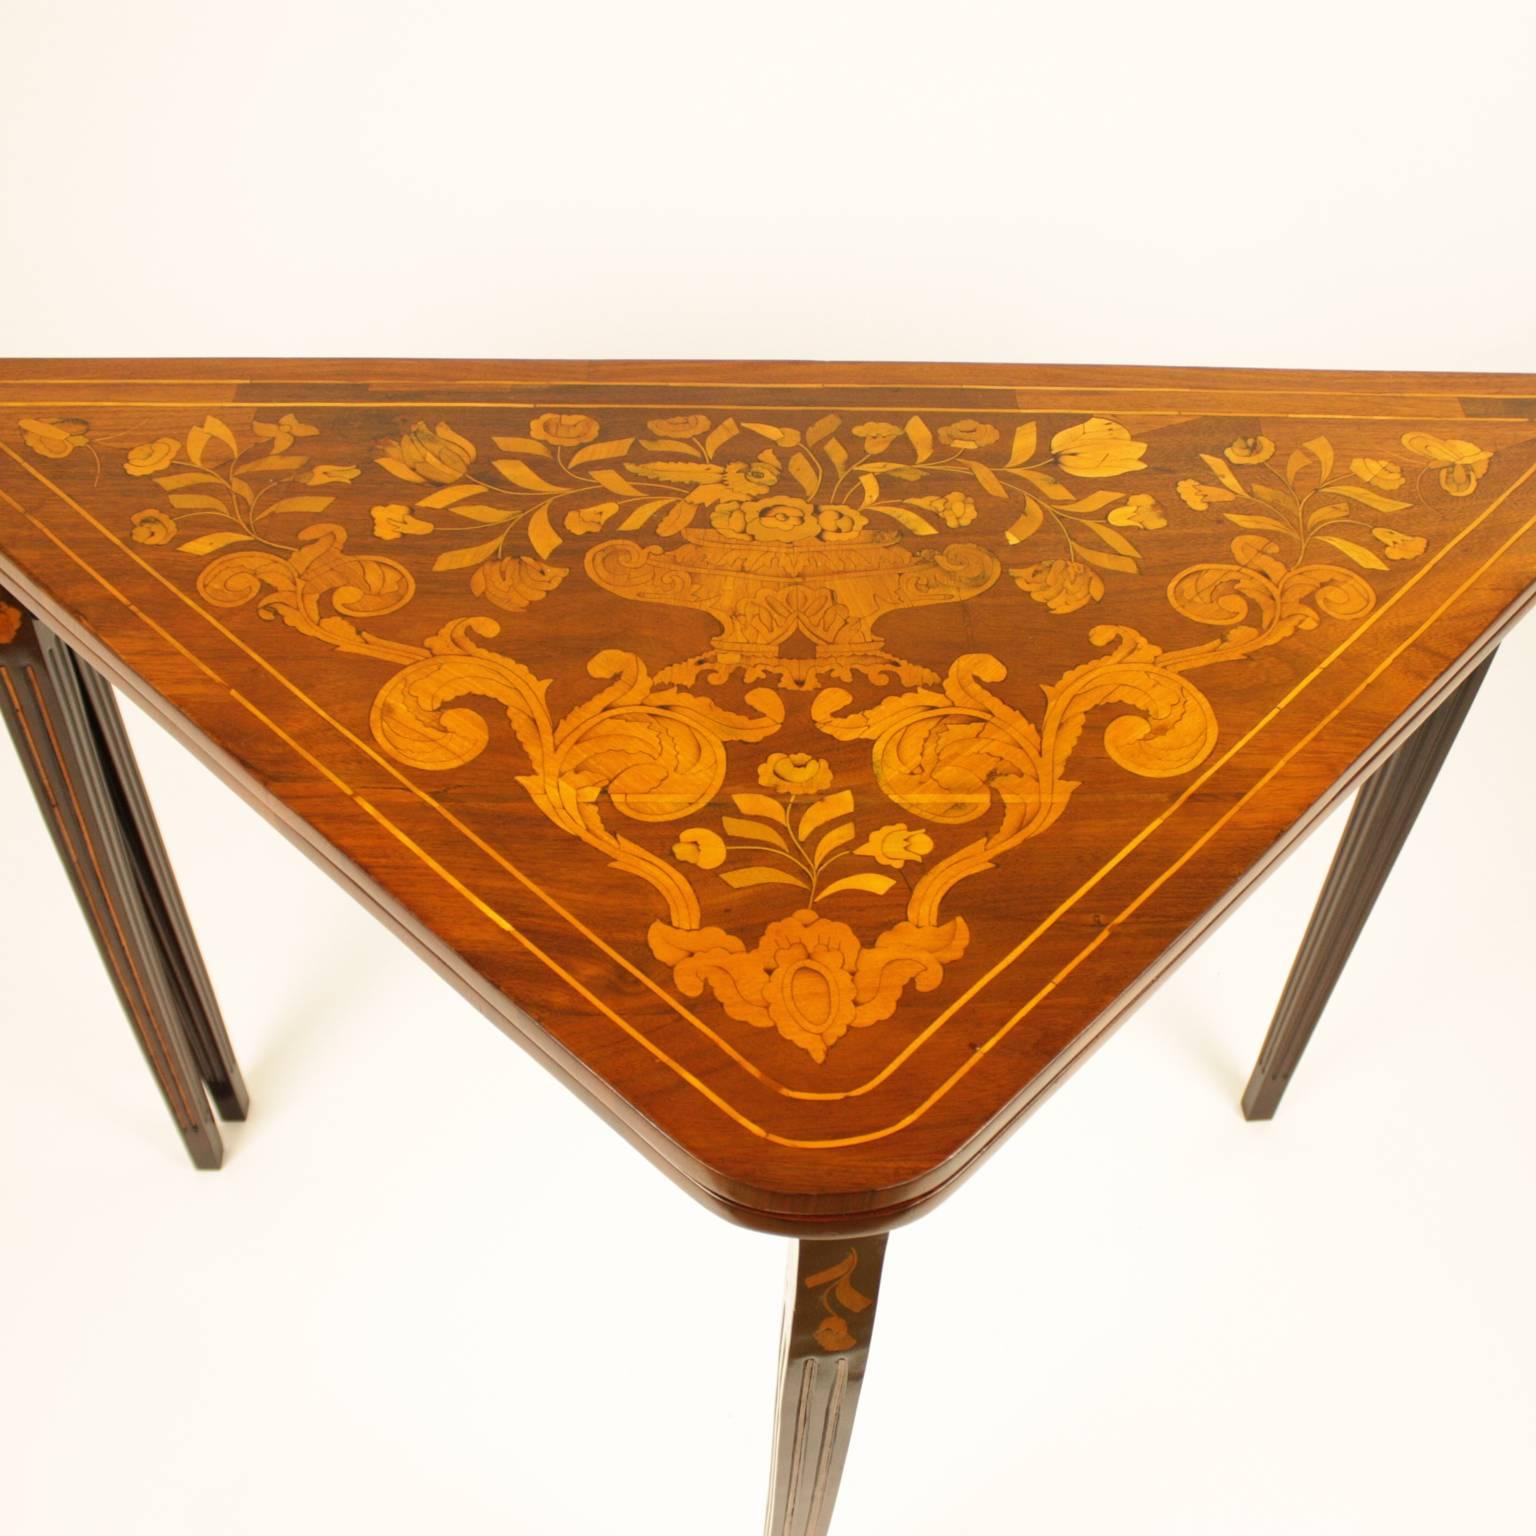 Louis XVI Early 19th Century Dutch Mahogany and Floral Marquetry Game Table